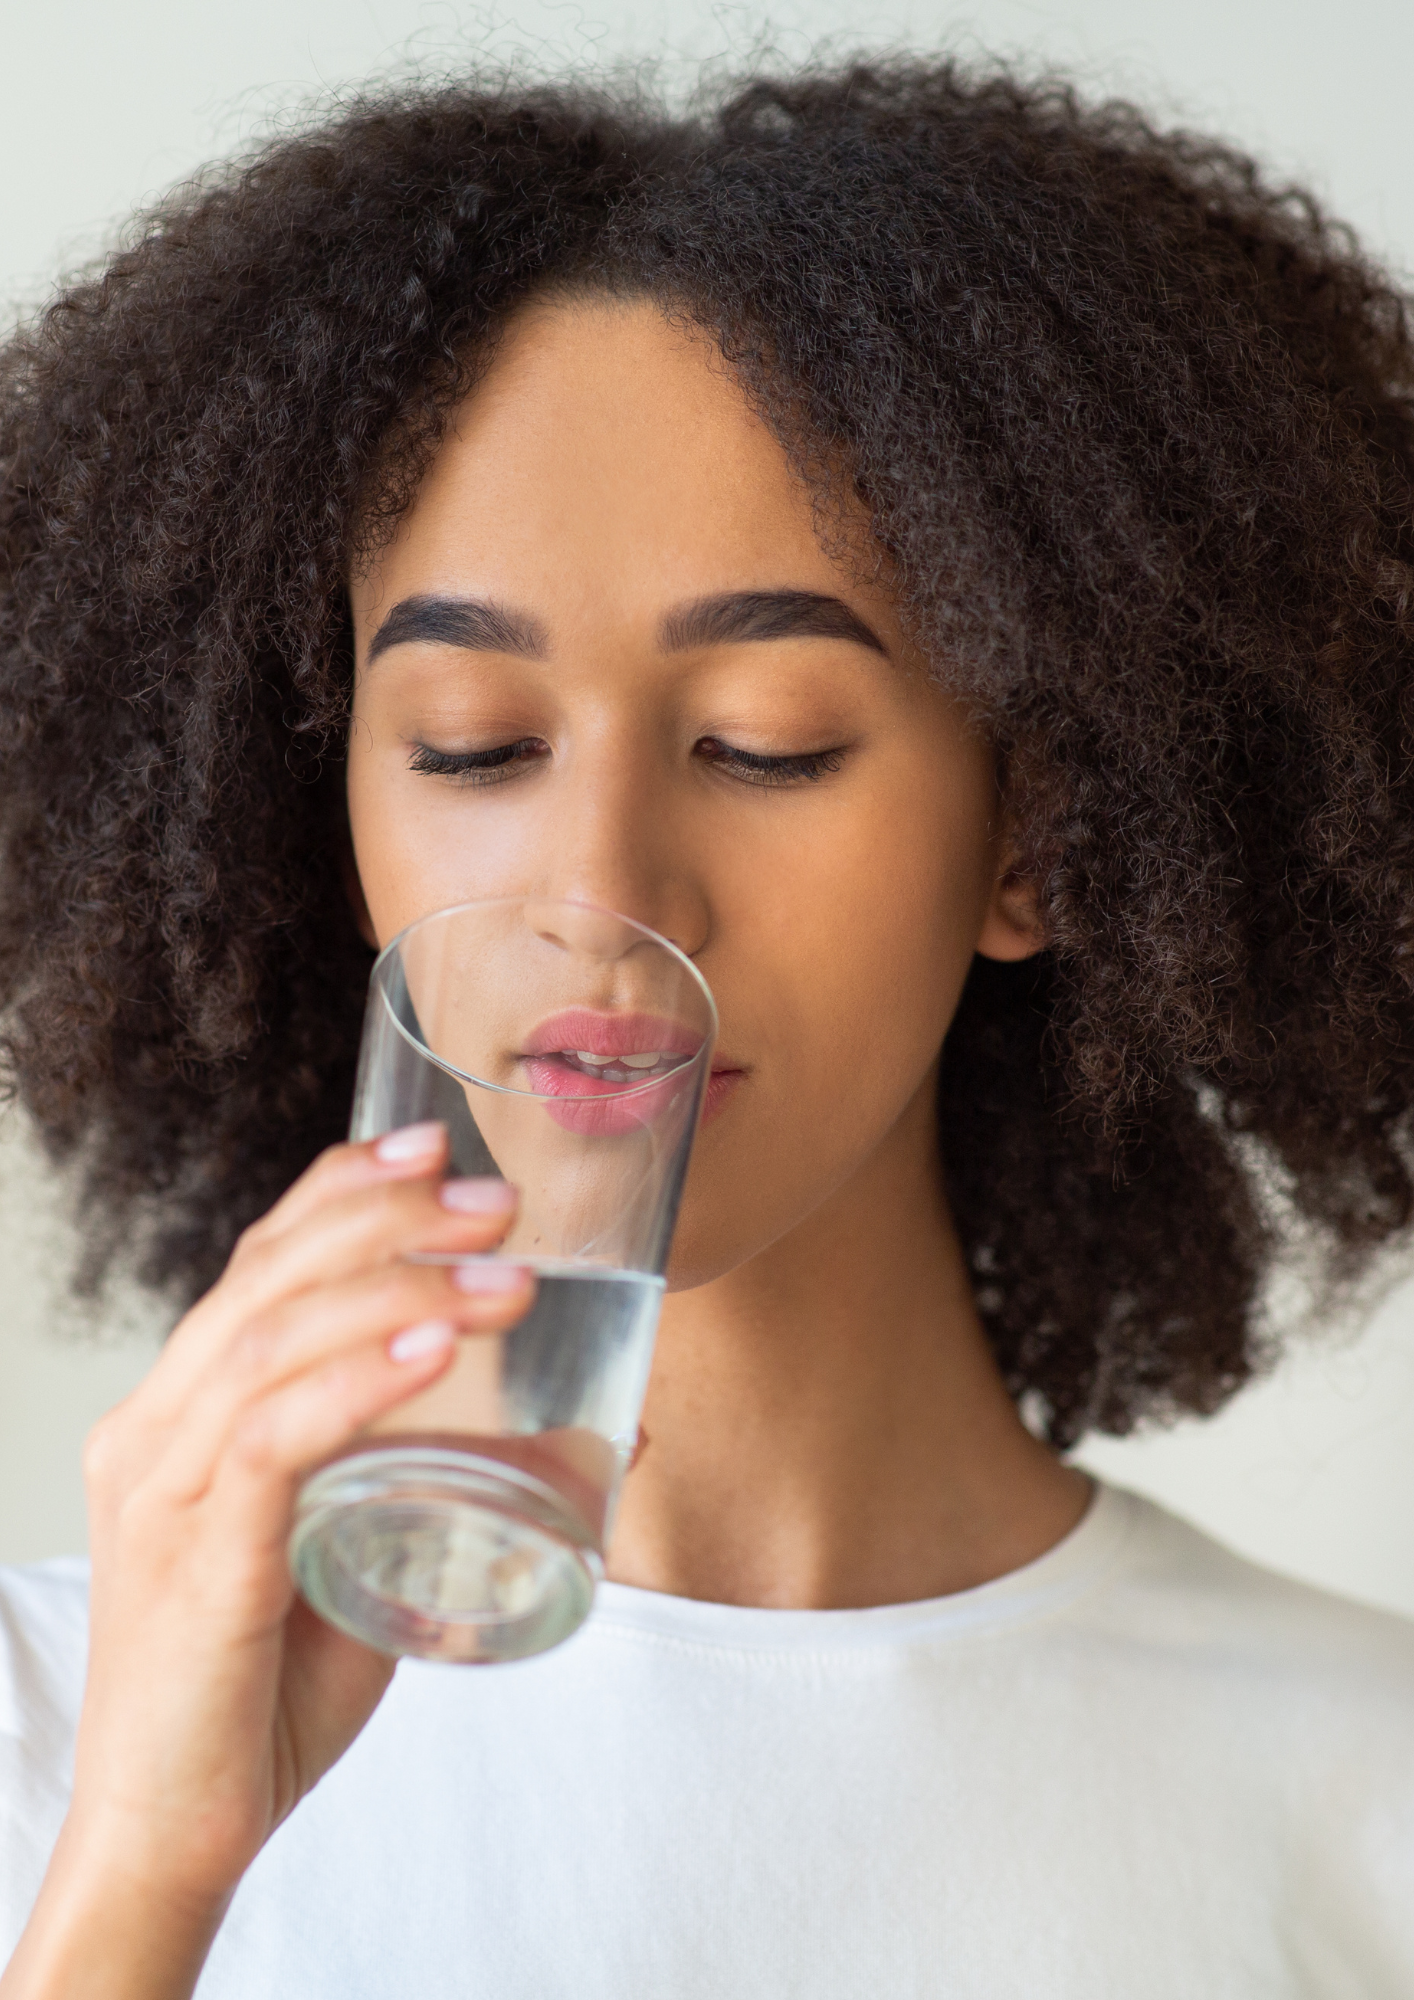 The Essential Elixir: The Importance of Water for Skin and Health